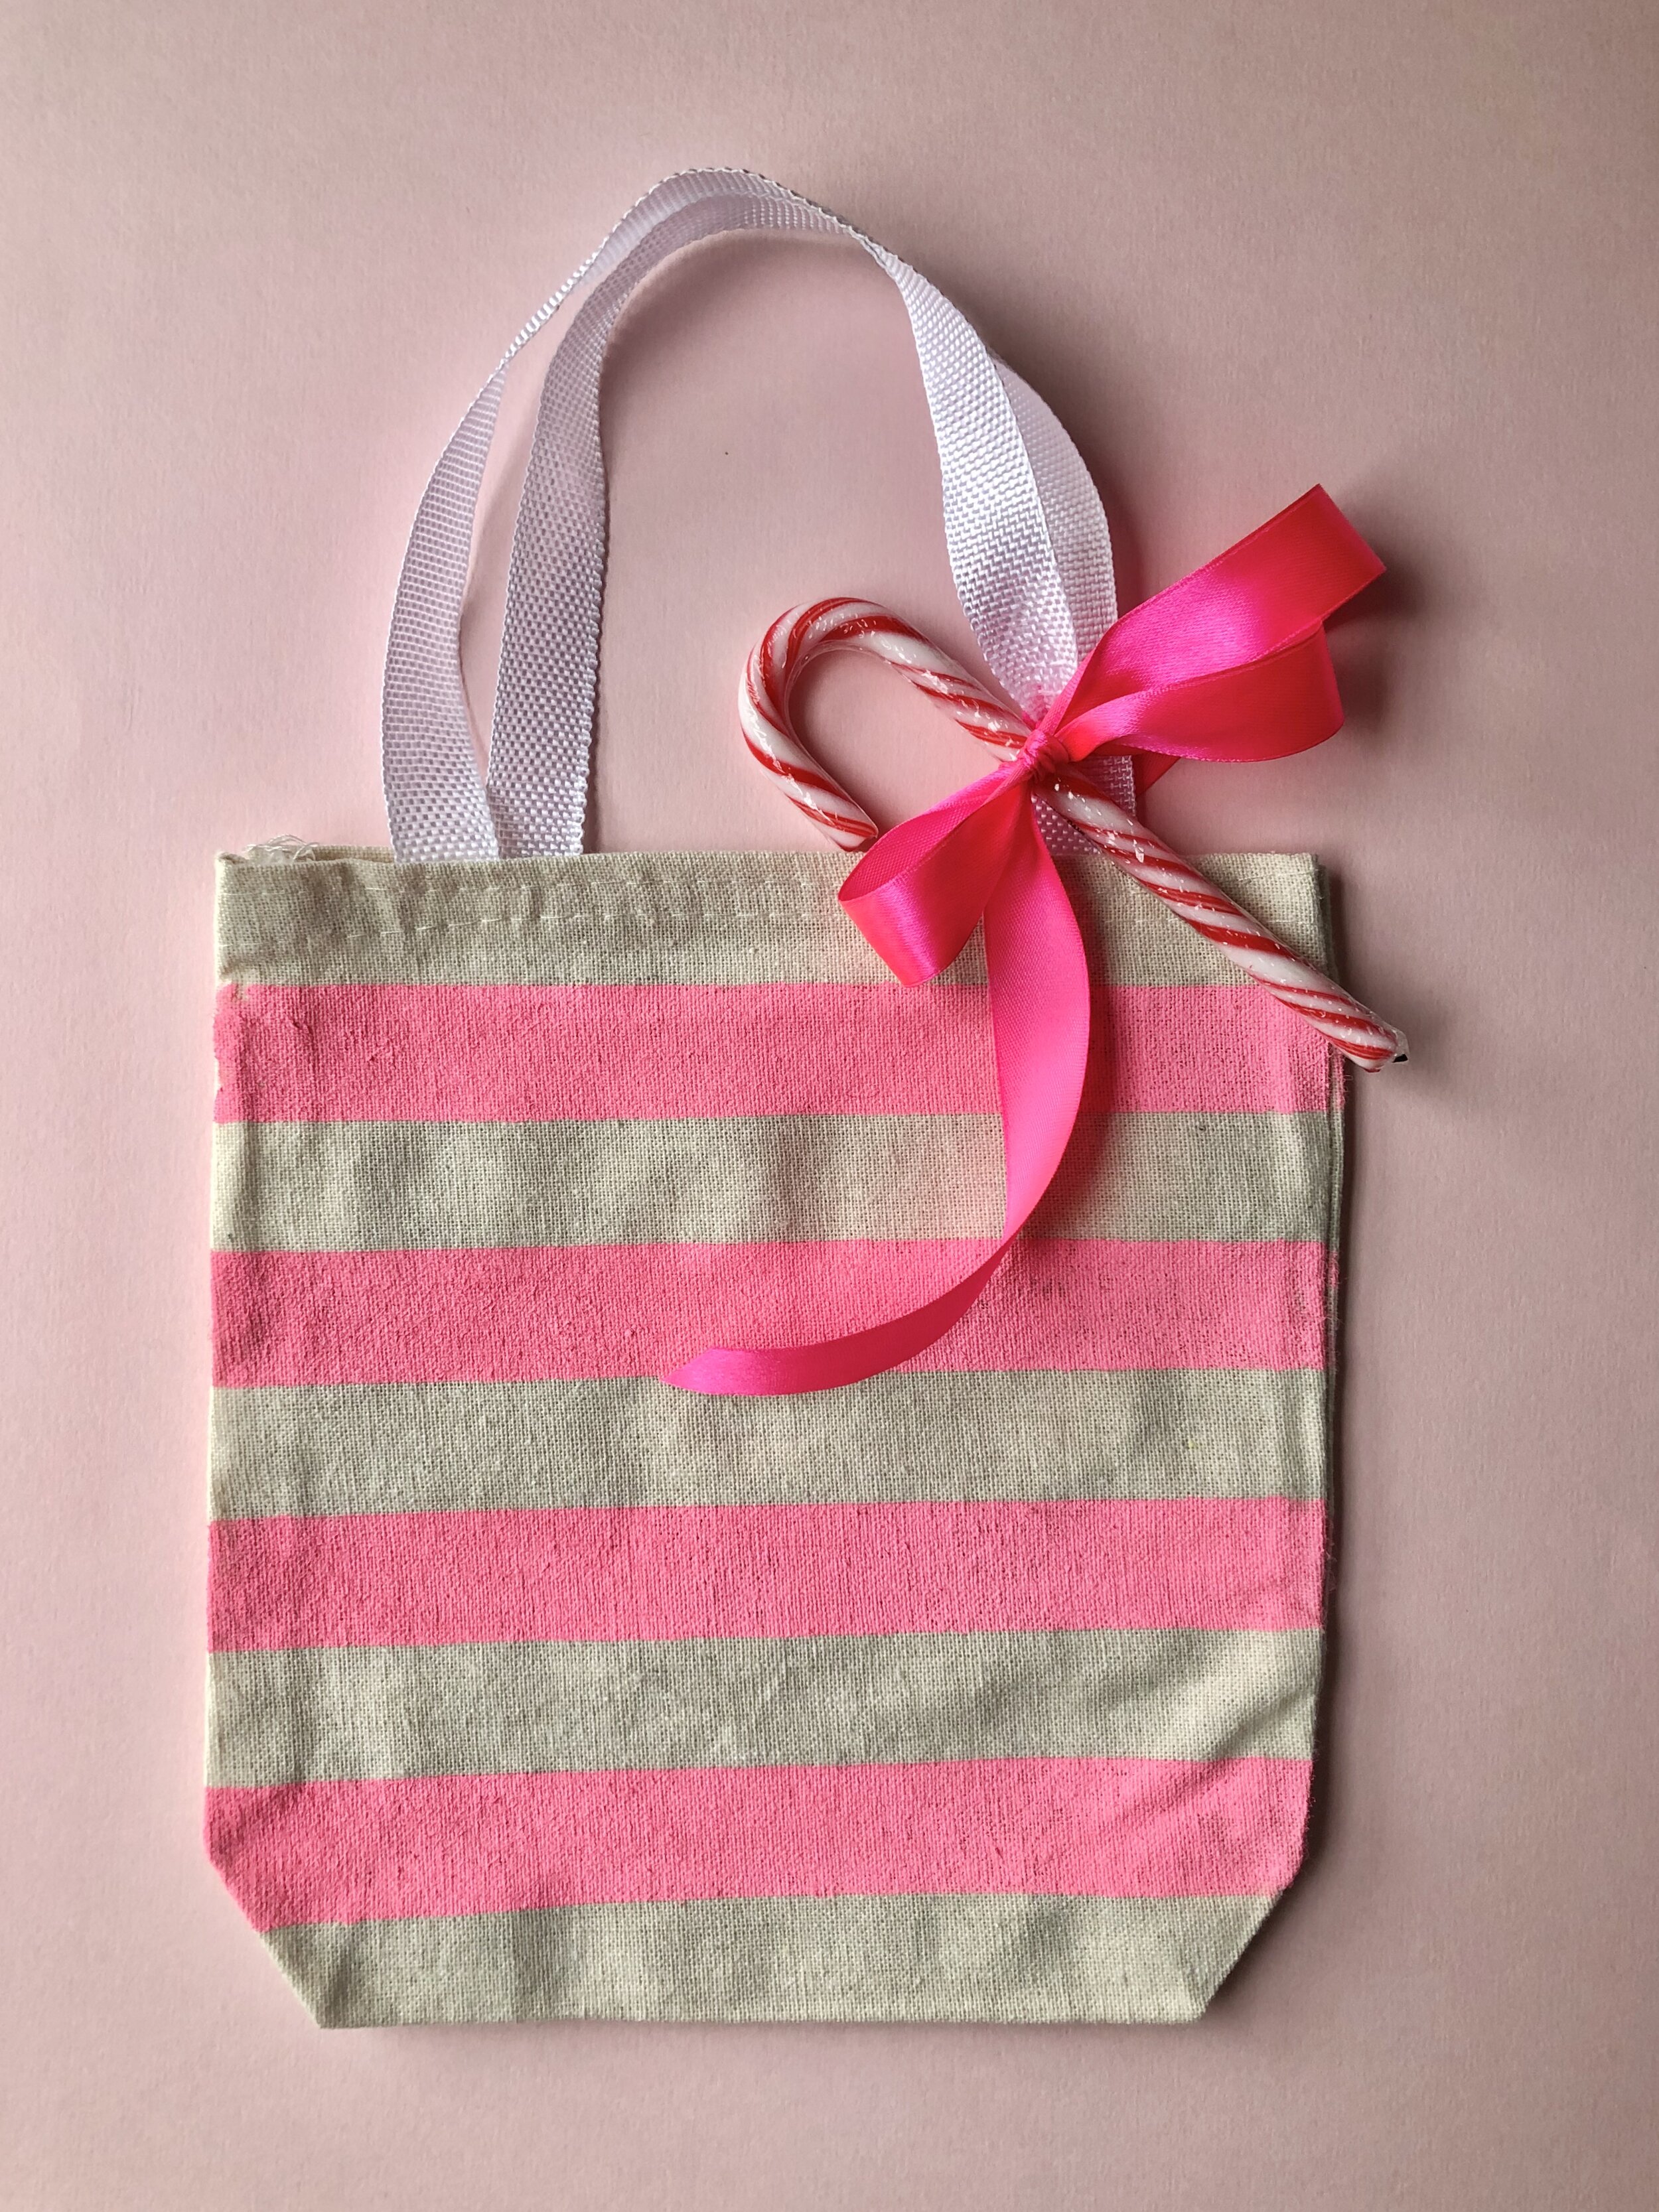 The Craft Decor PP Woven Shopping Bag With Handle